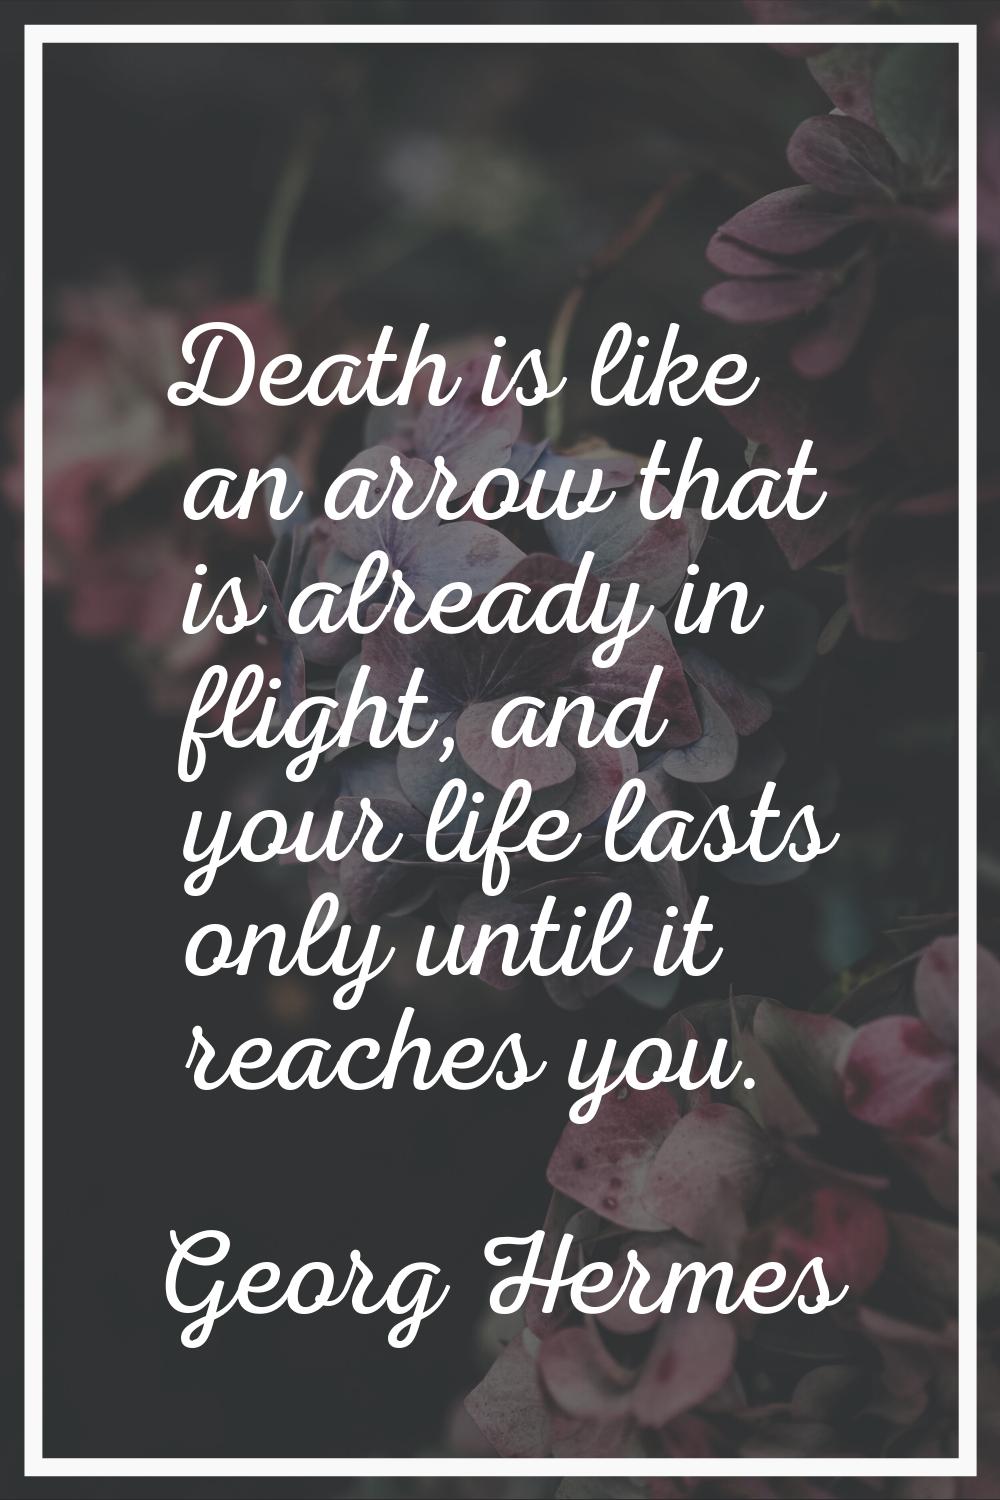 Death is like an arrow that is already in flight, and your life lasts only until it reaches you.